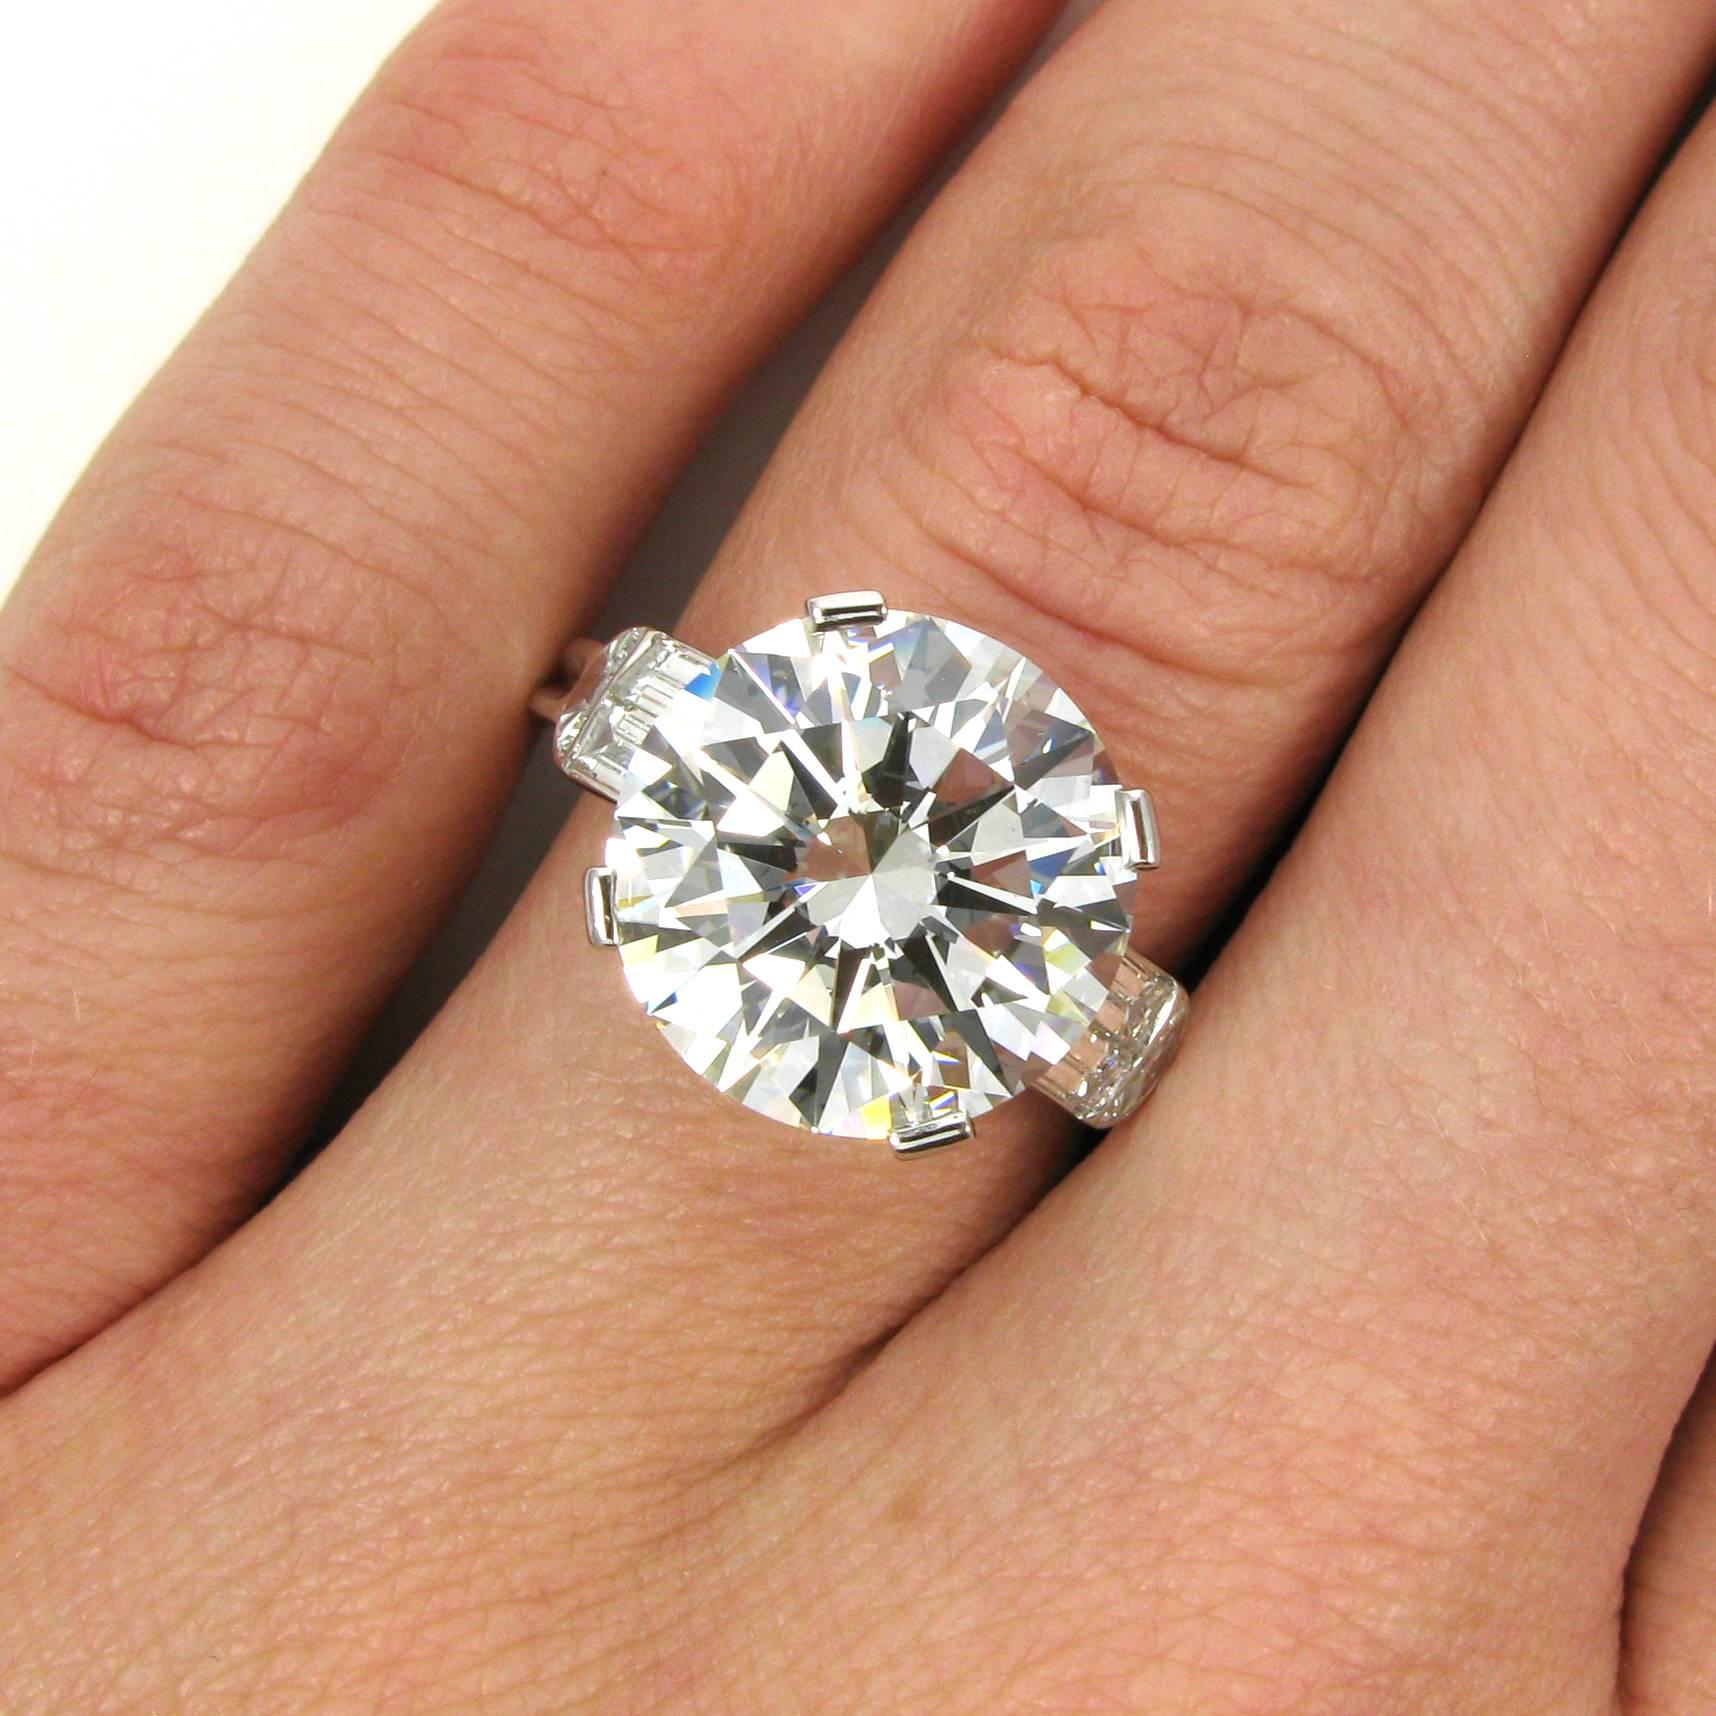 A truly stunning 7.10 carat round brilliant-cut diamond with H color and VS1 clarity. This incredible diamond has excellent cut, polish and symmetry and is set into a J Birnbach platinum mounting accented with four straight baguettes and two